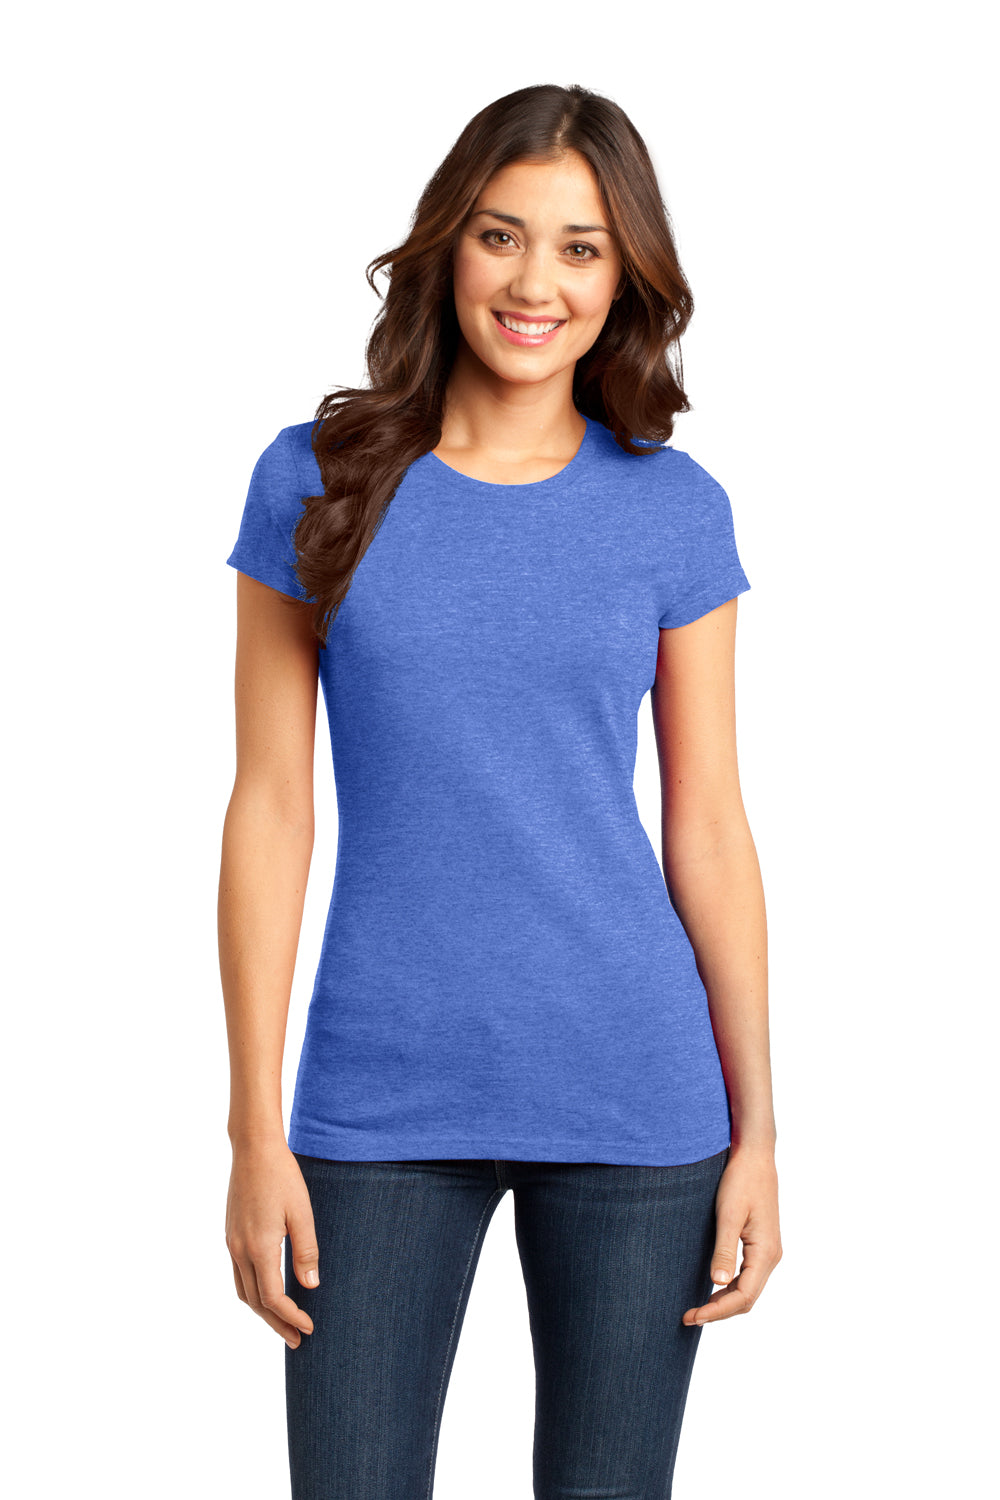 District DT6001 Womens Very Important Short Sleeve Crewneck T-Shirt Royal Blue Frost Front